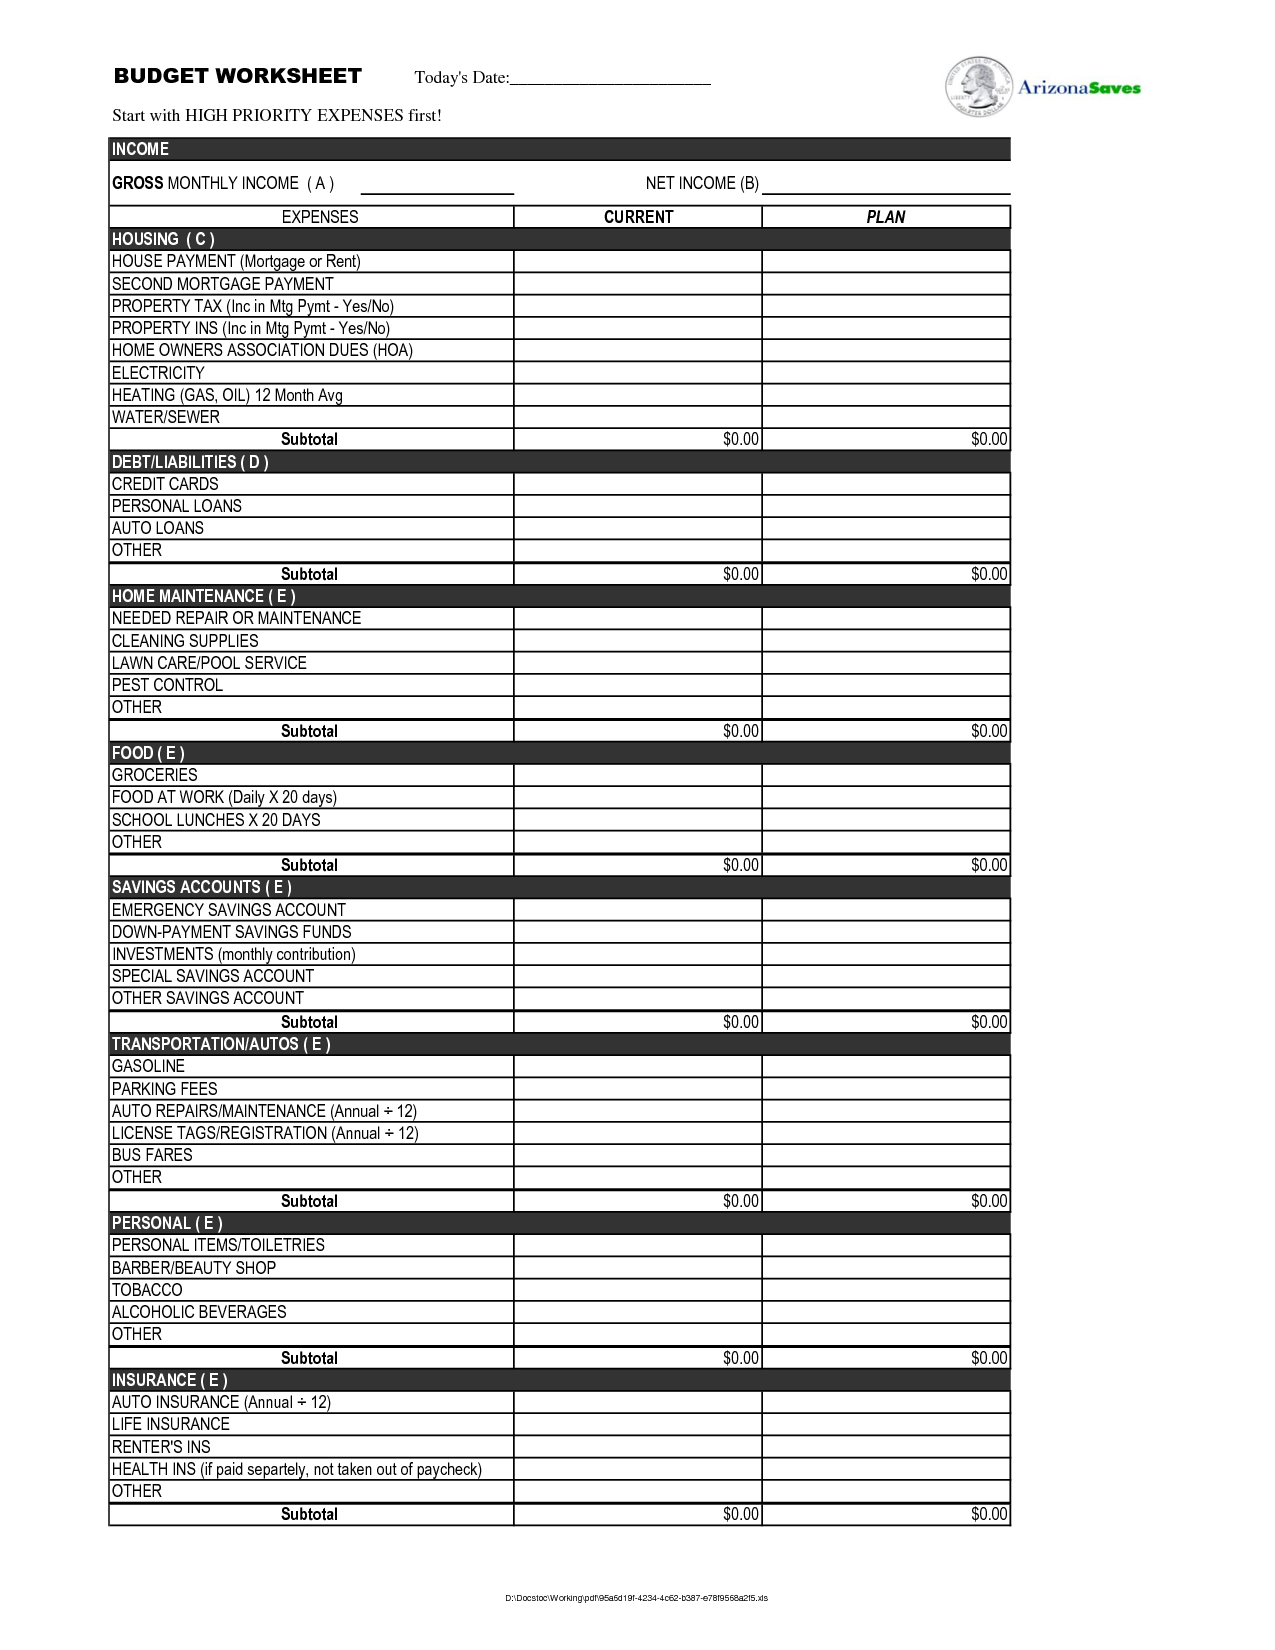 Monthly Income Expense Worksheet